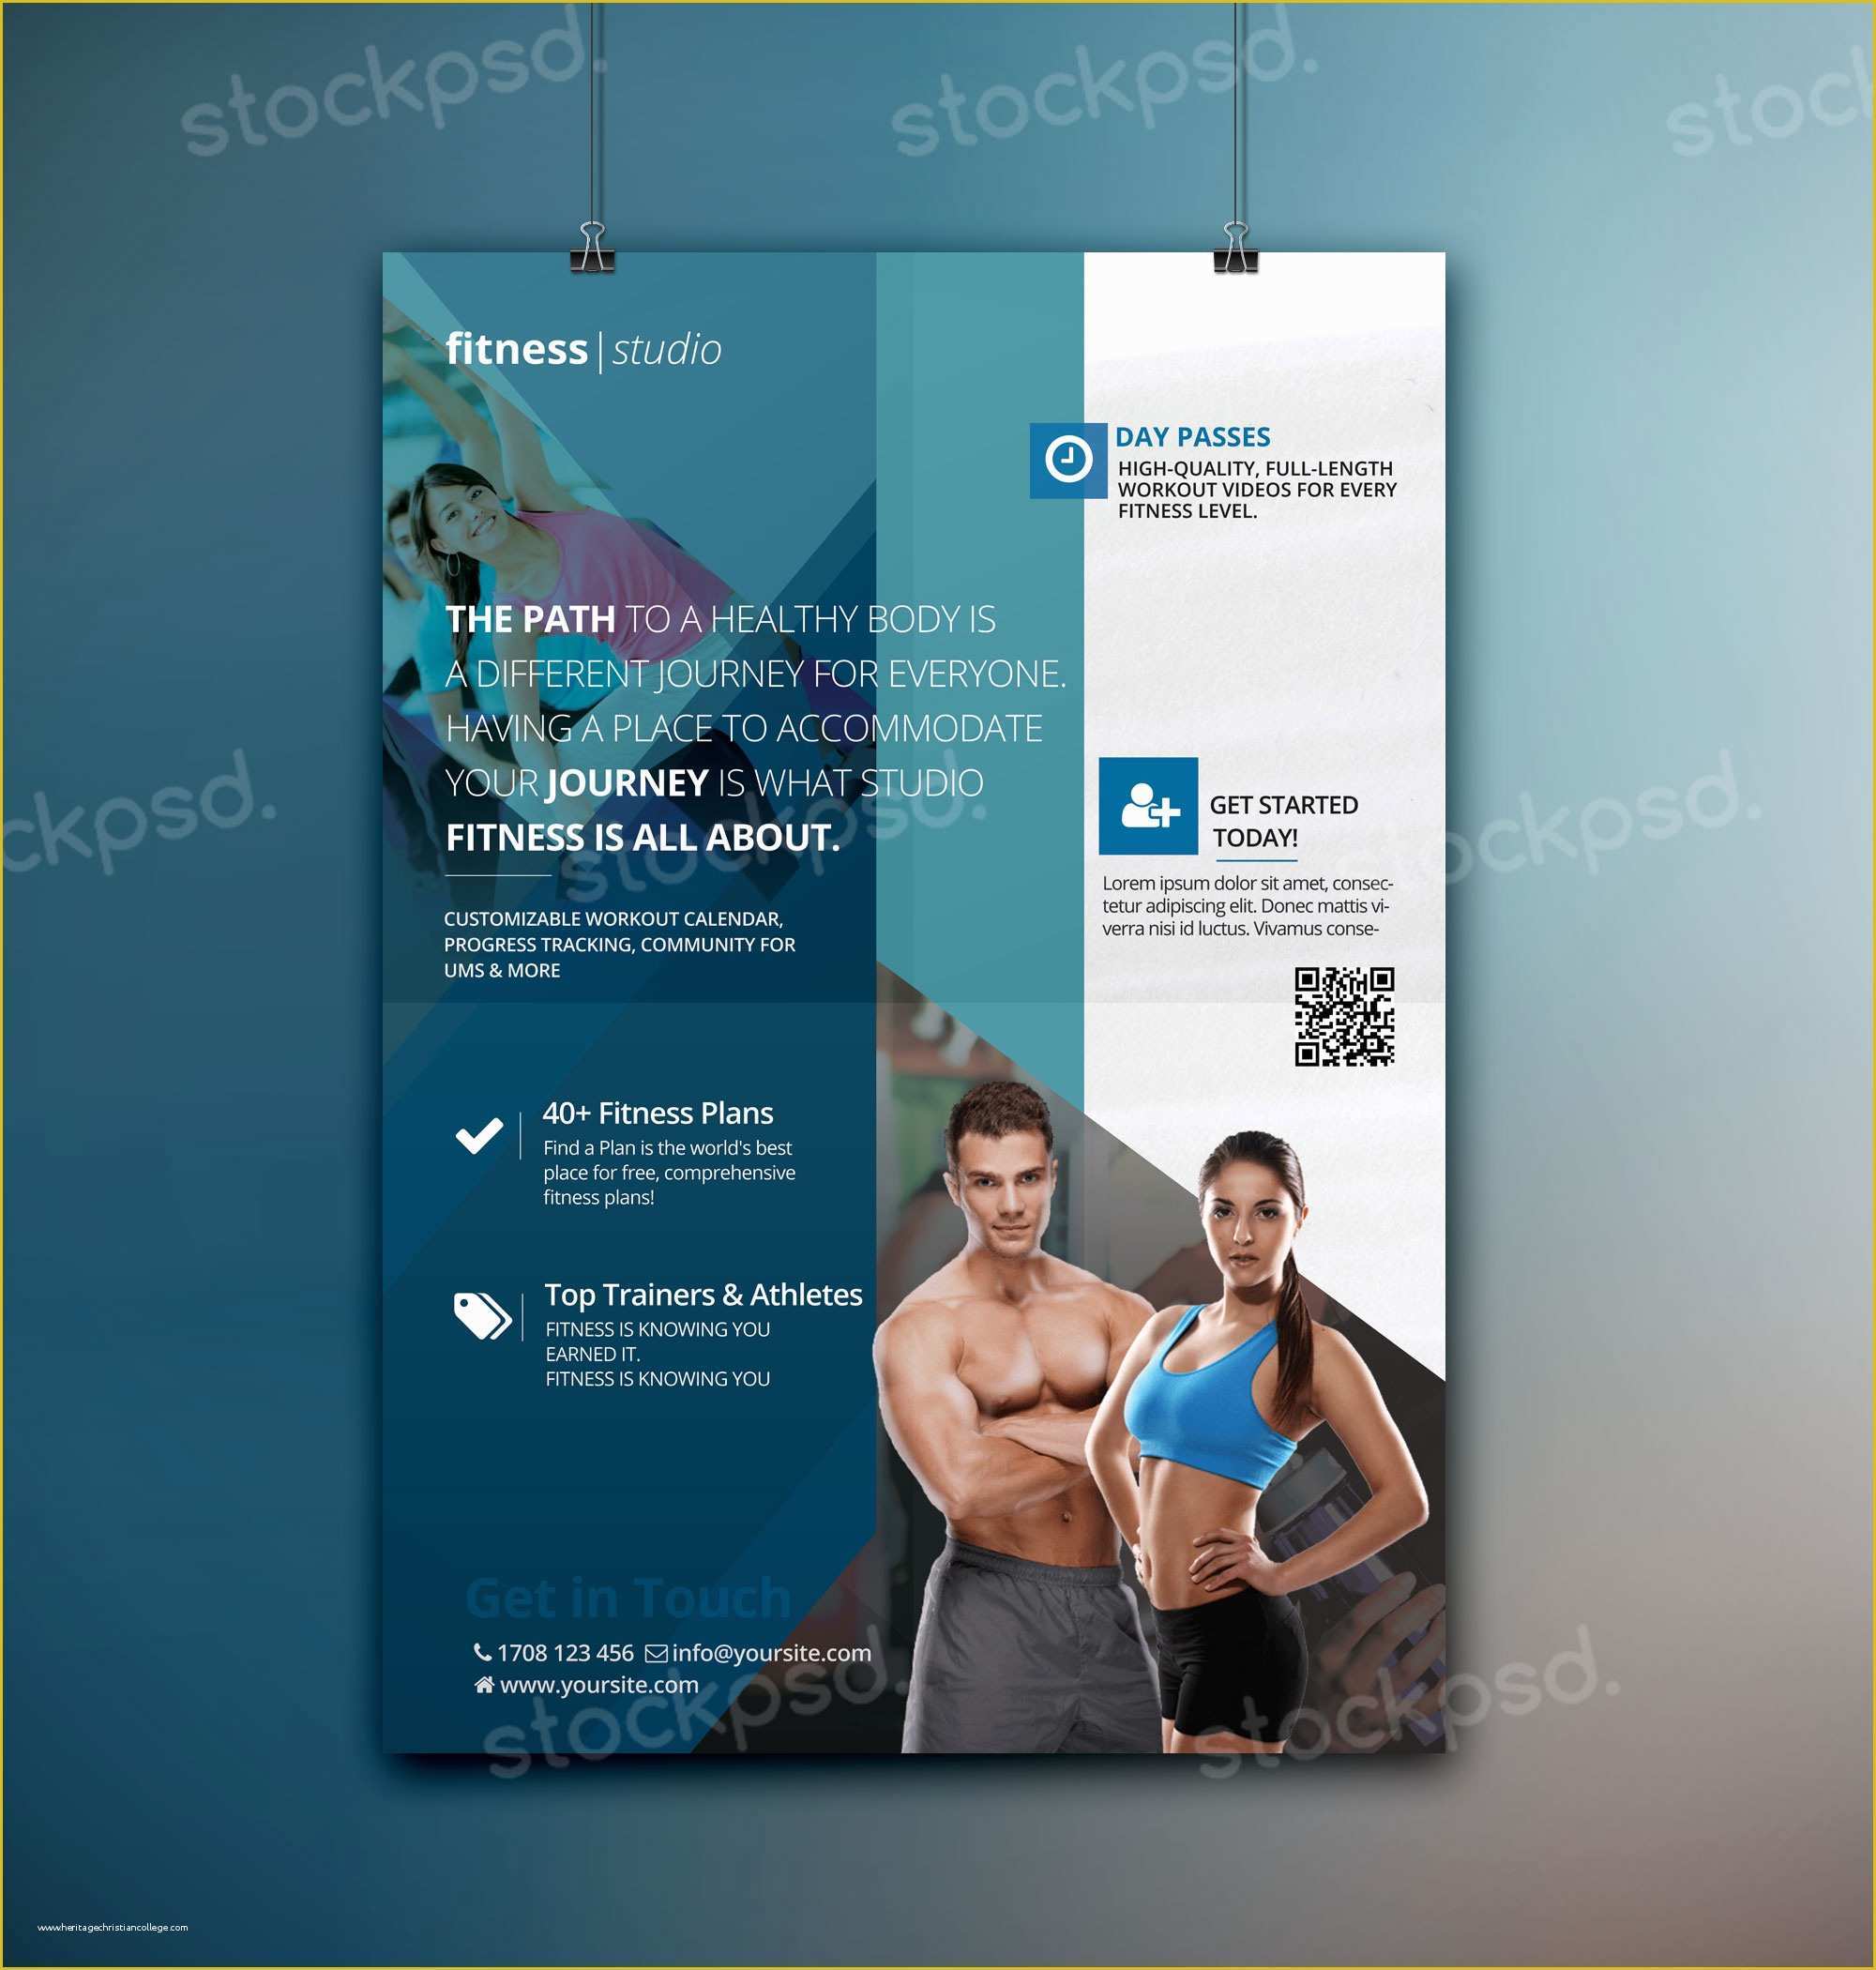 Fitness Poster Template Free Of Fitness Studio Free Psd Flyer Template Stockpsd